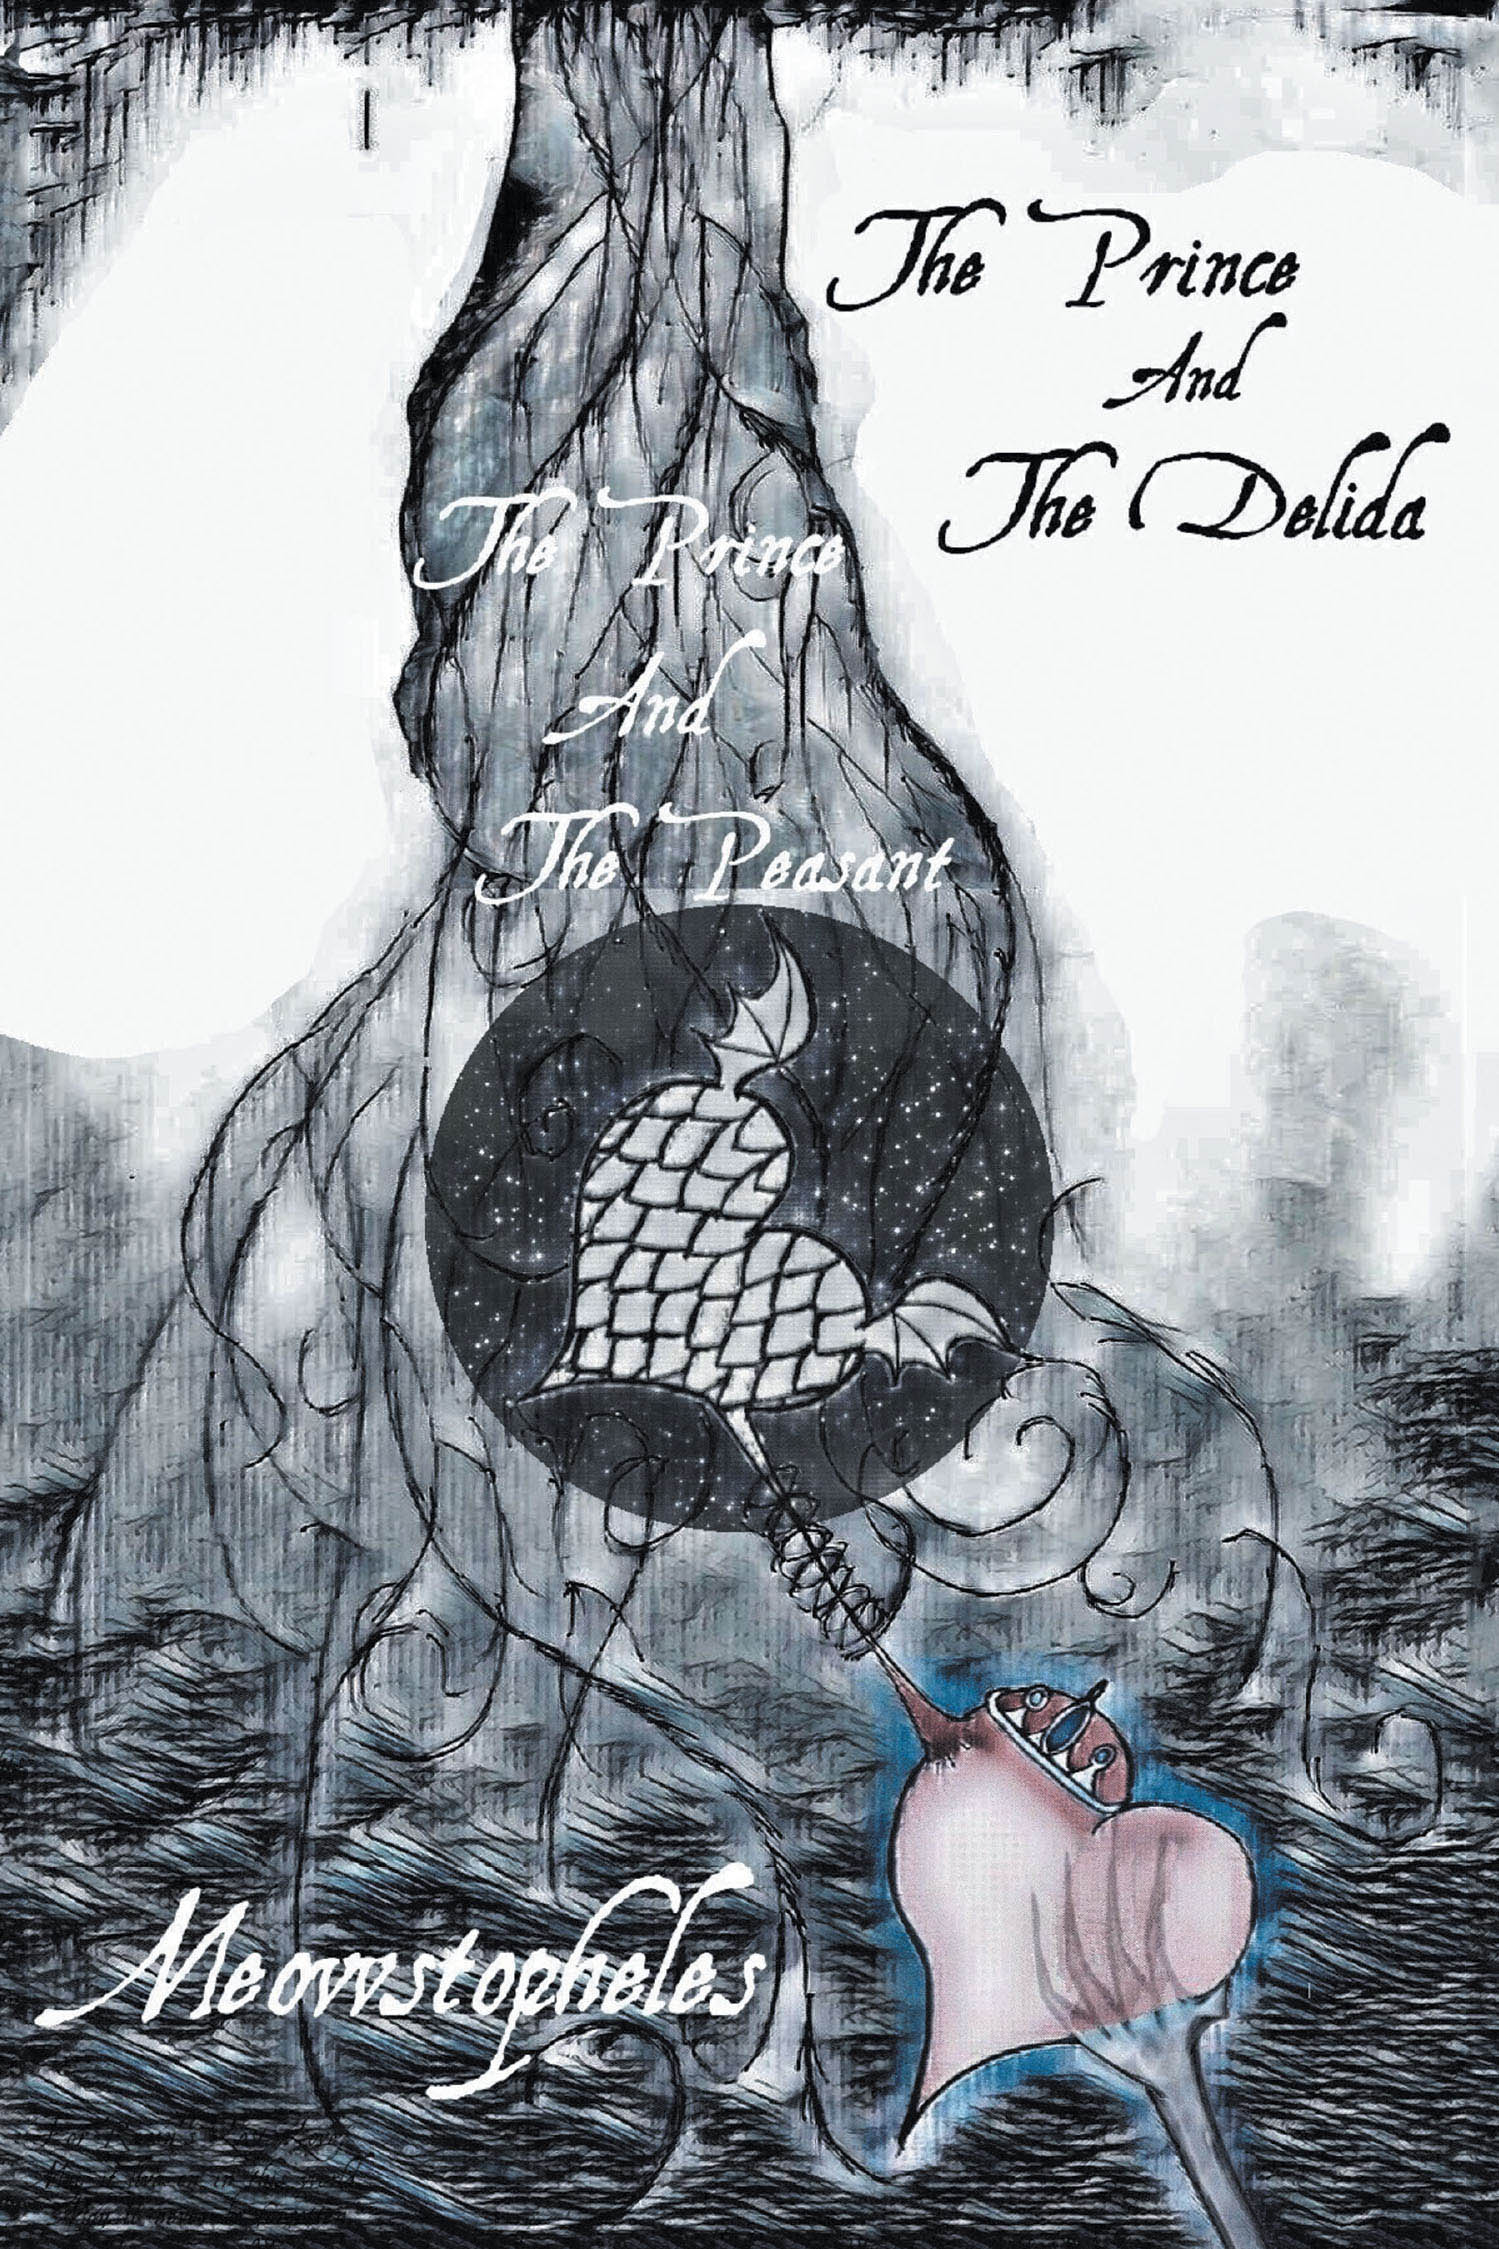 Meowstopheles’s New Book, “The Prince and the Delida: The Prince and the Peasant,” Follows a Prince and His Friend as They Navigate Personal Challenges and Dark Secrets